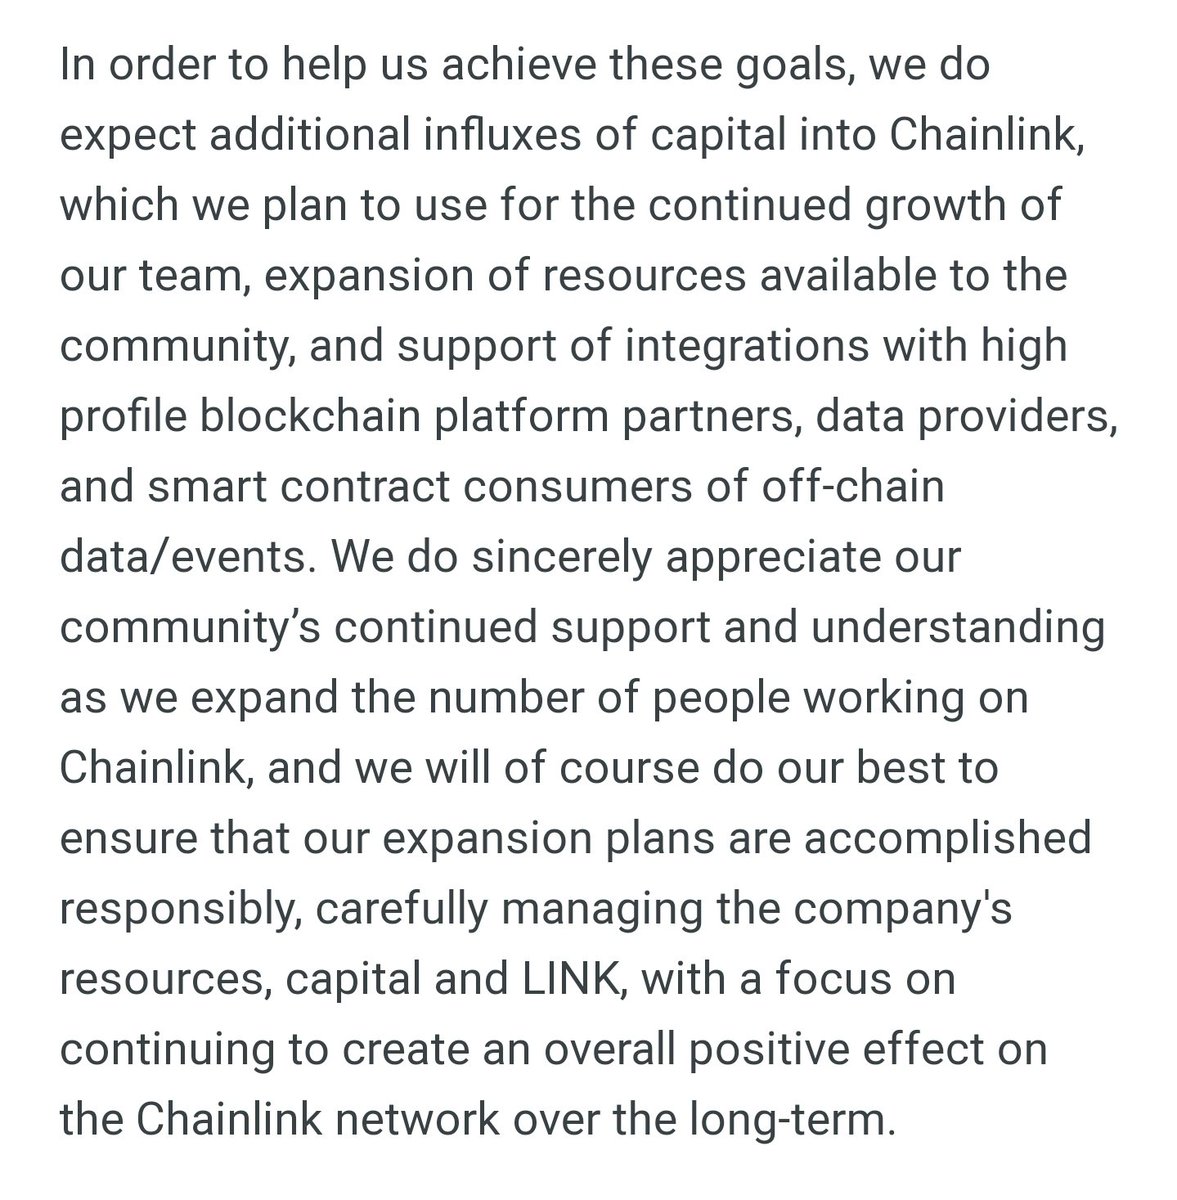 - Successfully bootstrapped networks that now secures billions for the DeFi economy- Does not allow price discussion in any official channels- Did not raise funds in excess of what was needed to grow the network- Team is based out of the Cayman Islands and not the USA